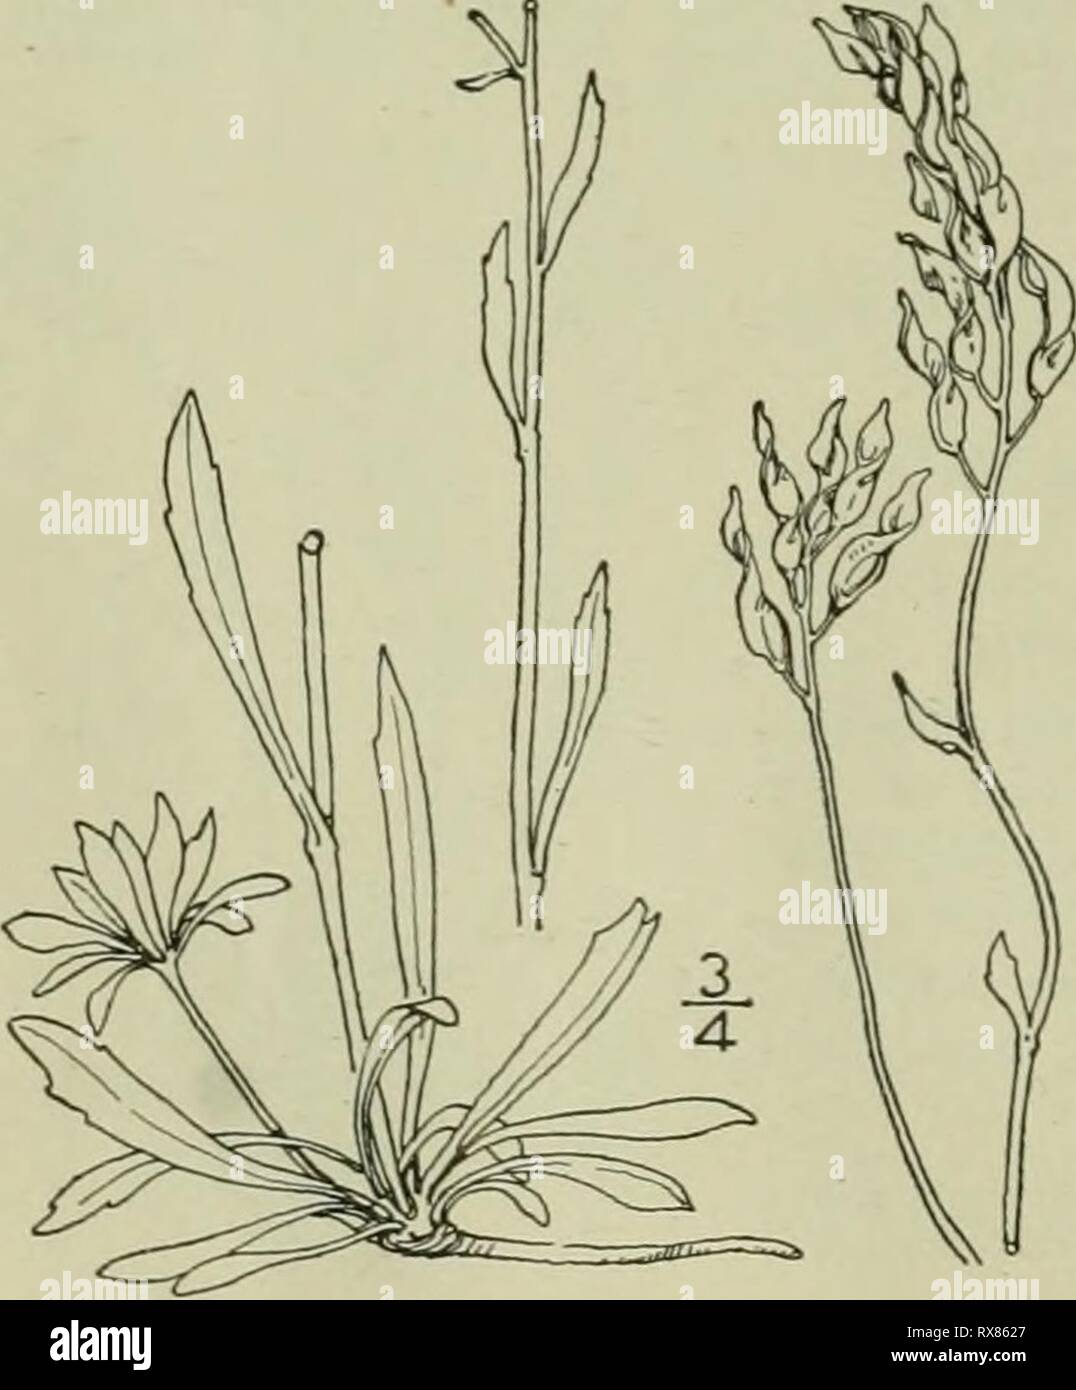 An illustrated flora of the An illustrated flora of the northern United States, Canada and the British possessions : from Newfoundland to the parallel of the southern boundary of Virginia and from the Atlantic Ocean westward to the 102nd meridian ed2illustratedflo02brit Year: 1913  CRUCIFERAE. 5. Draba nivalis Lilj. Yellow Arctic Whitlow-grass. Fig. 2001. Draba iihalis Lilj. Vet. Akad. Handl. 1793 : 208. 1793. Perennial by a short branched caudex; scapes tufted, somewhat pubescent, slender, leafless or sometimes bearing a small sessile leaf, 1-4' high. Basal leaves usually numerous, tufted, ob Stock Photo